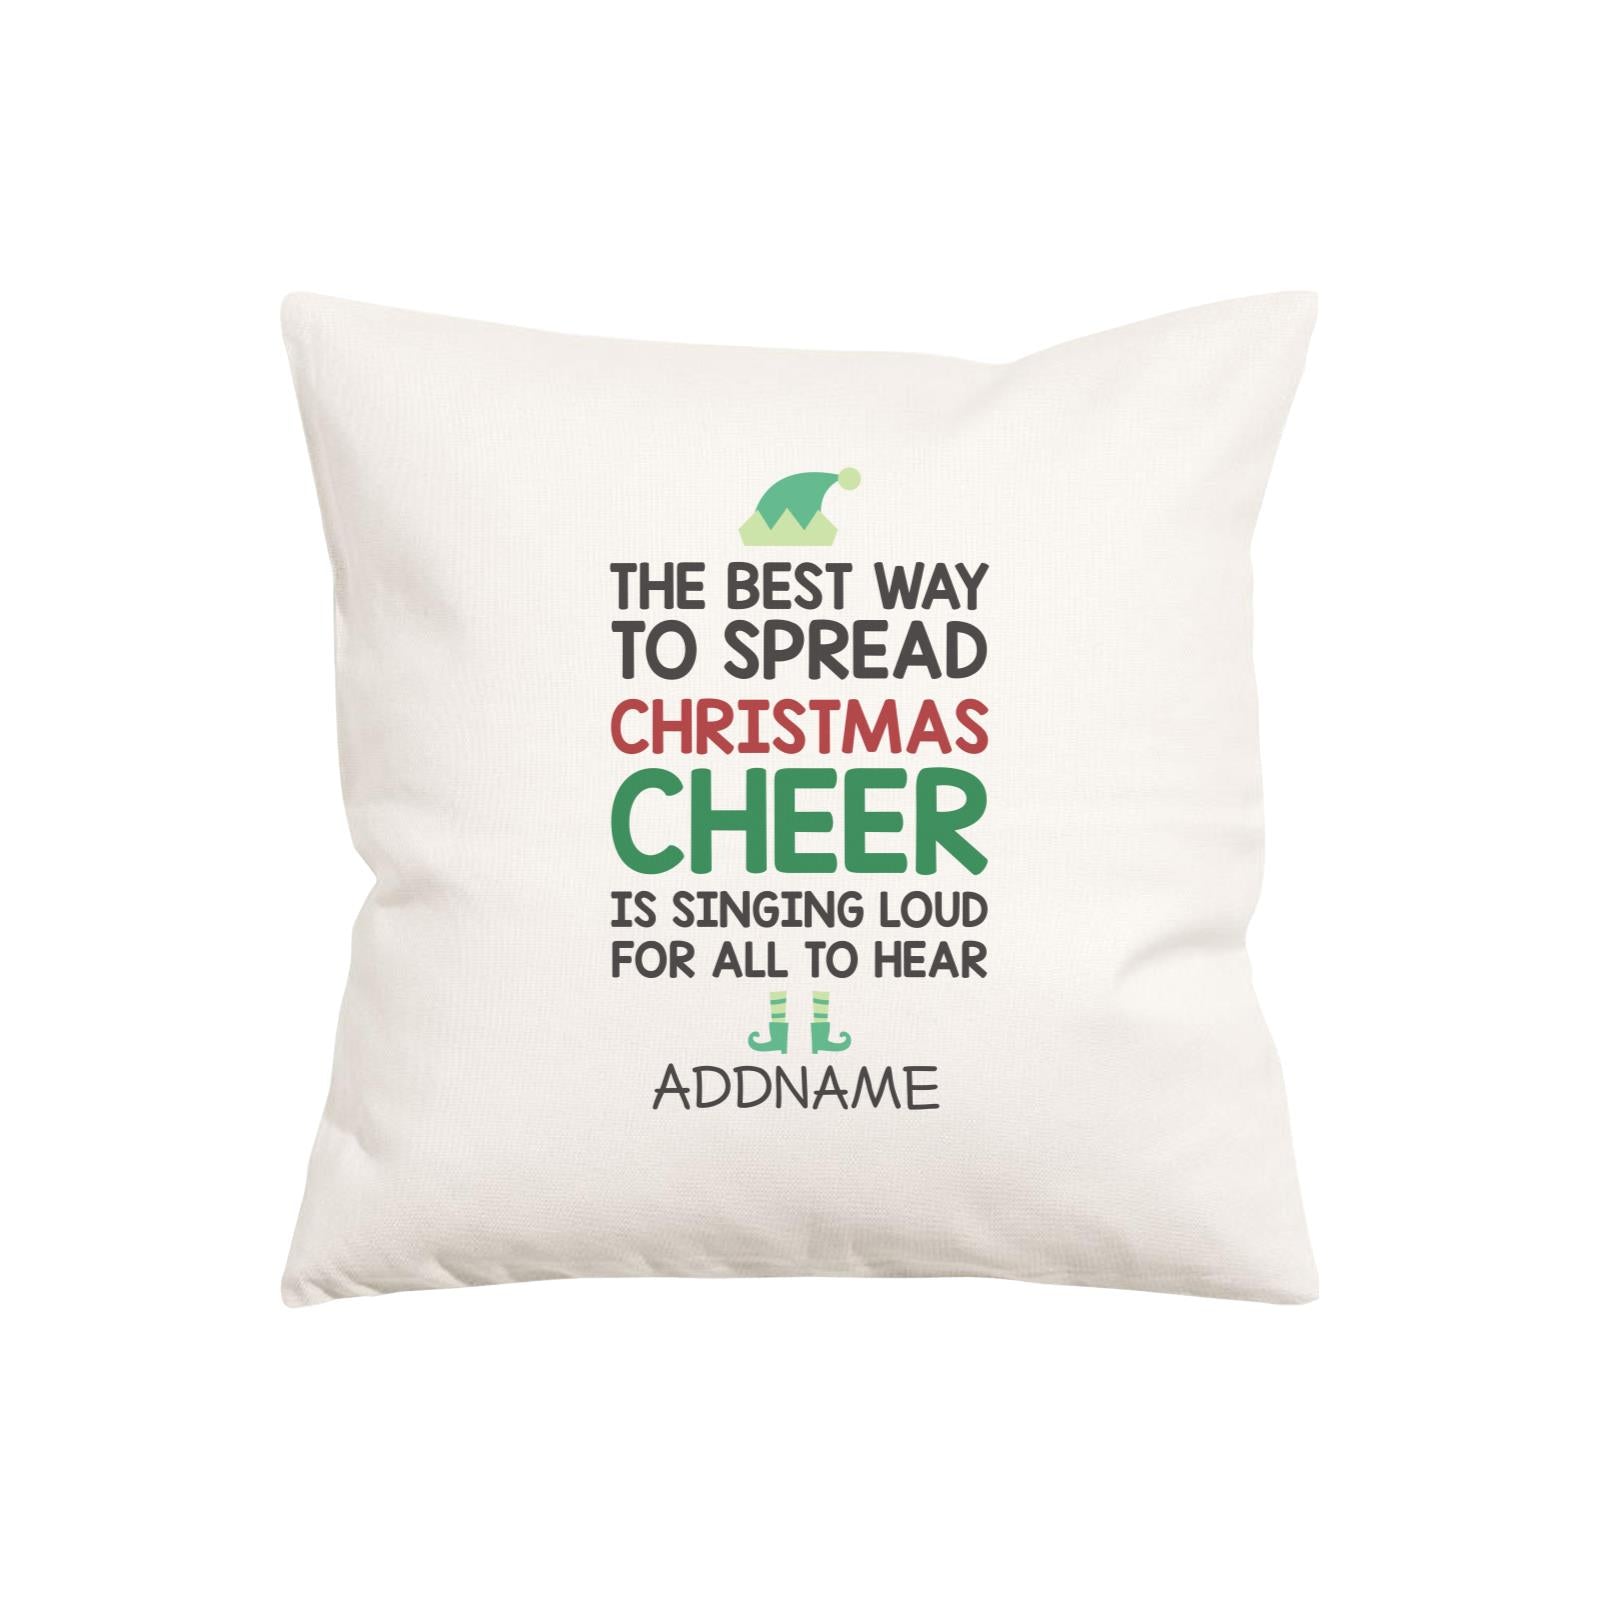 Xmas The Best Way To Spread Christmas Cheer Pillow Pillow Cushion